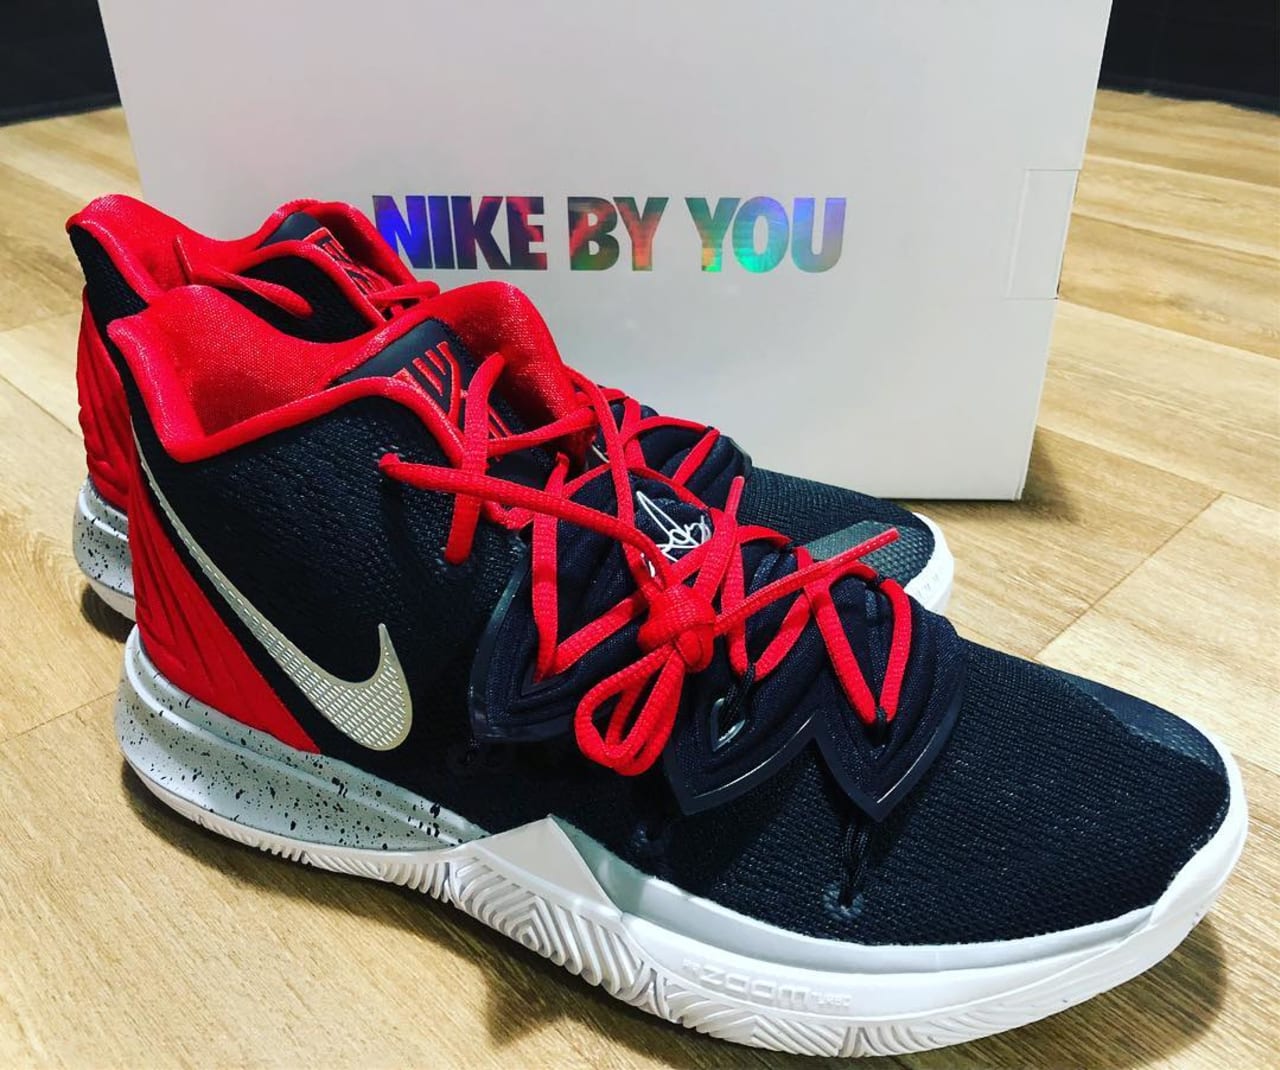 nike kyrie 5 by you